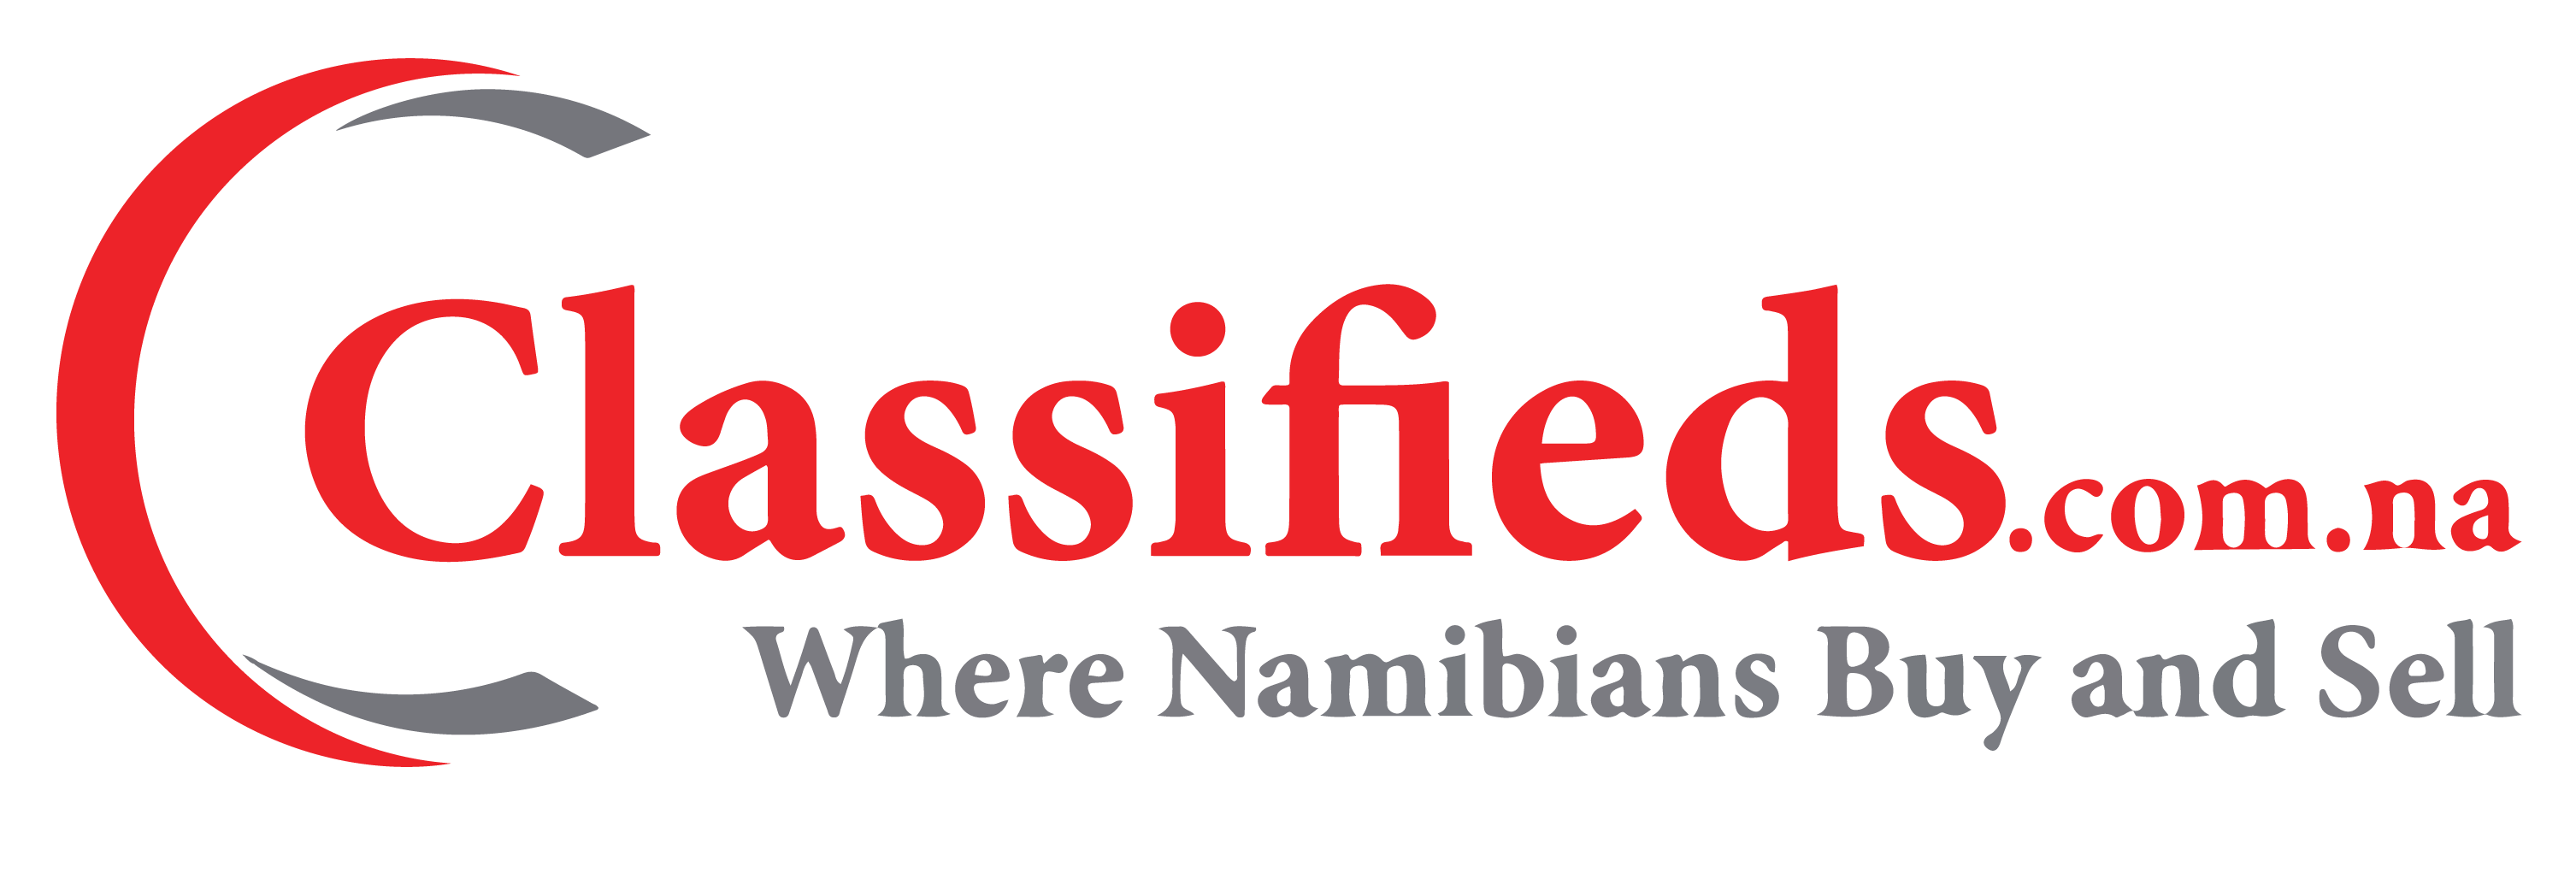 Classified Logo - Classifieds.com.na Namibians Buy and Sell